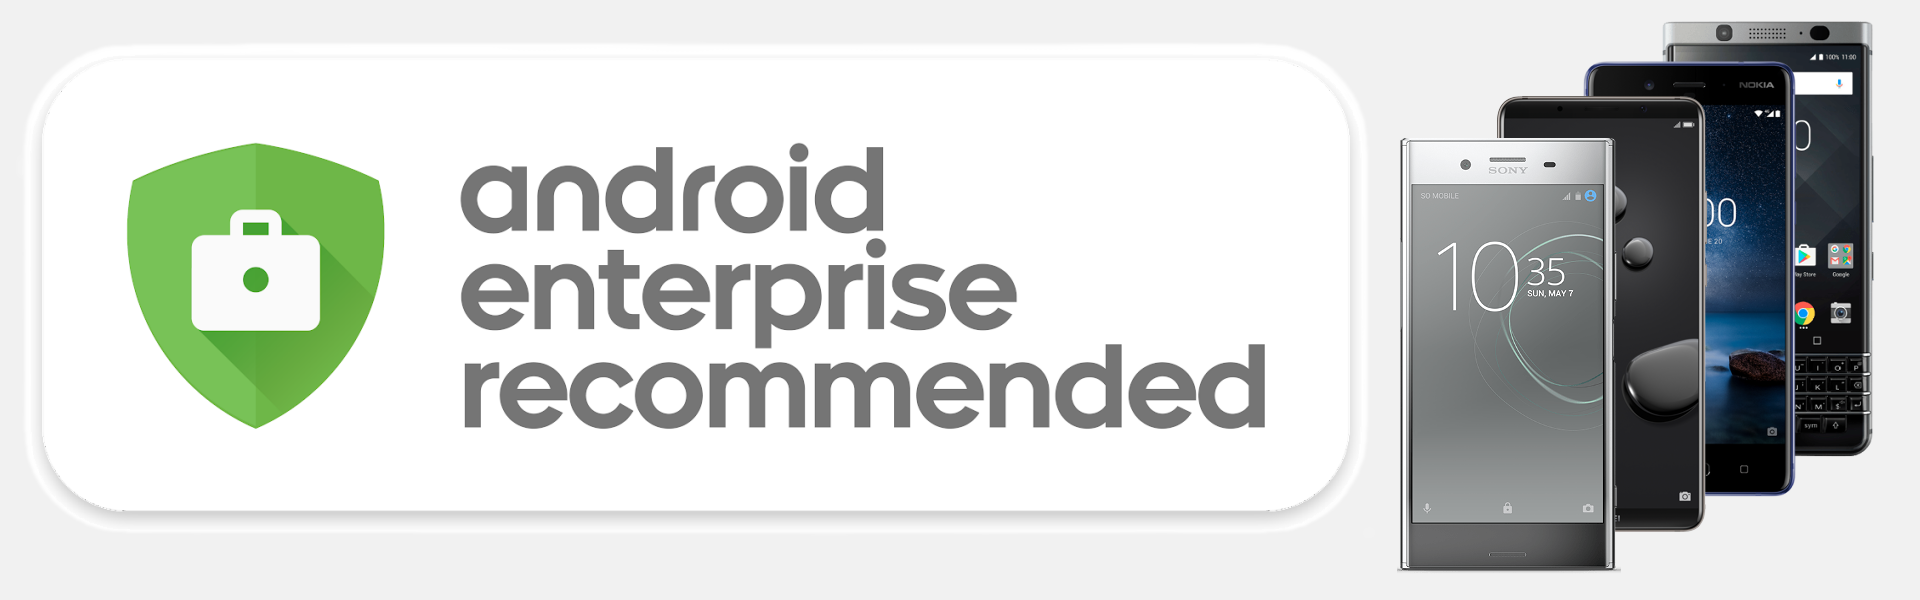 Android Enterprise Recommended Smartphone